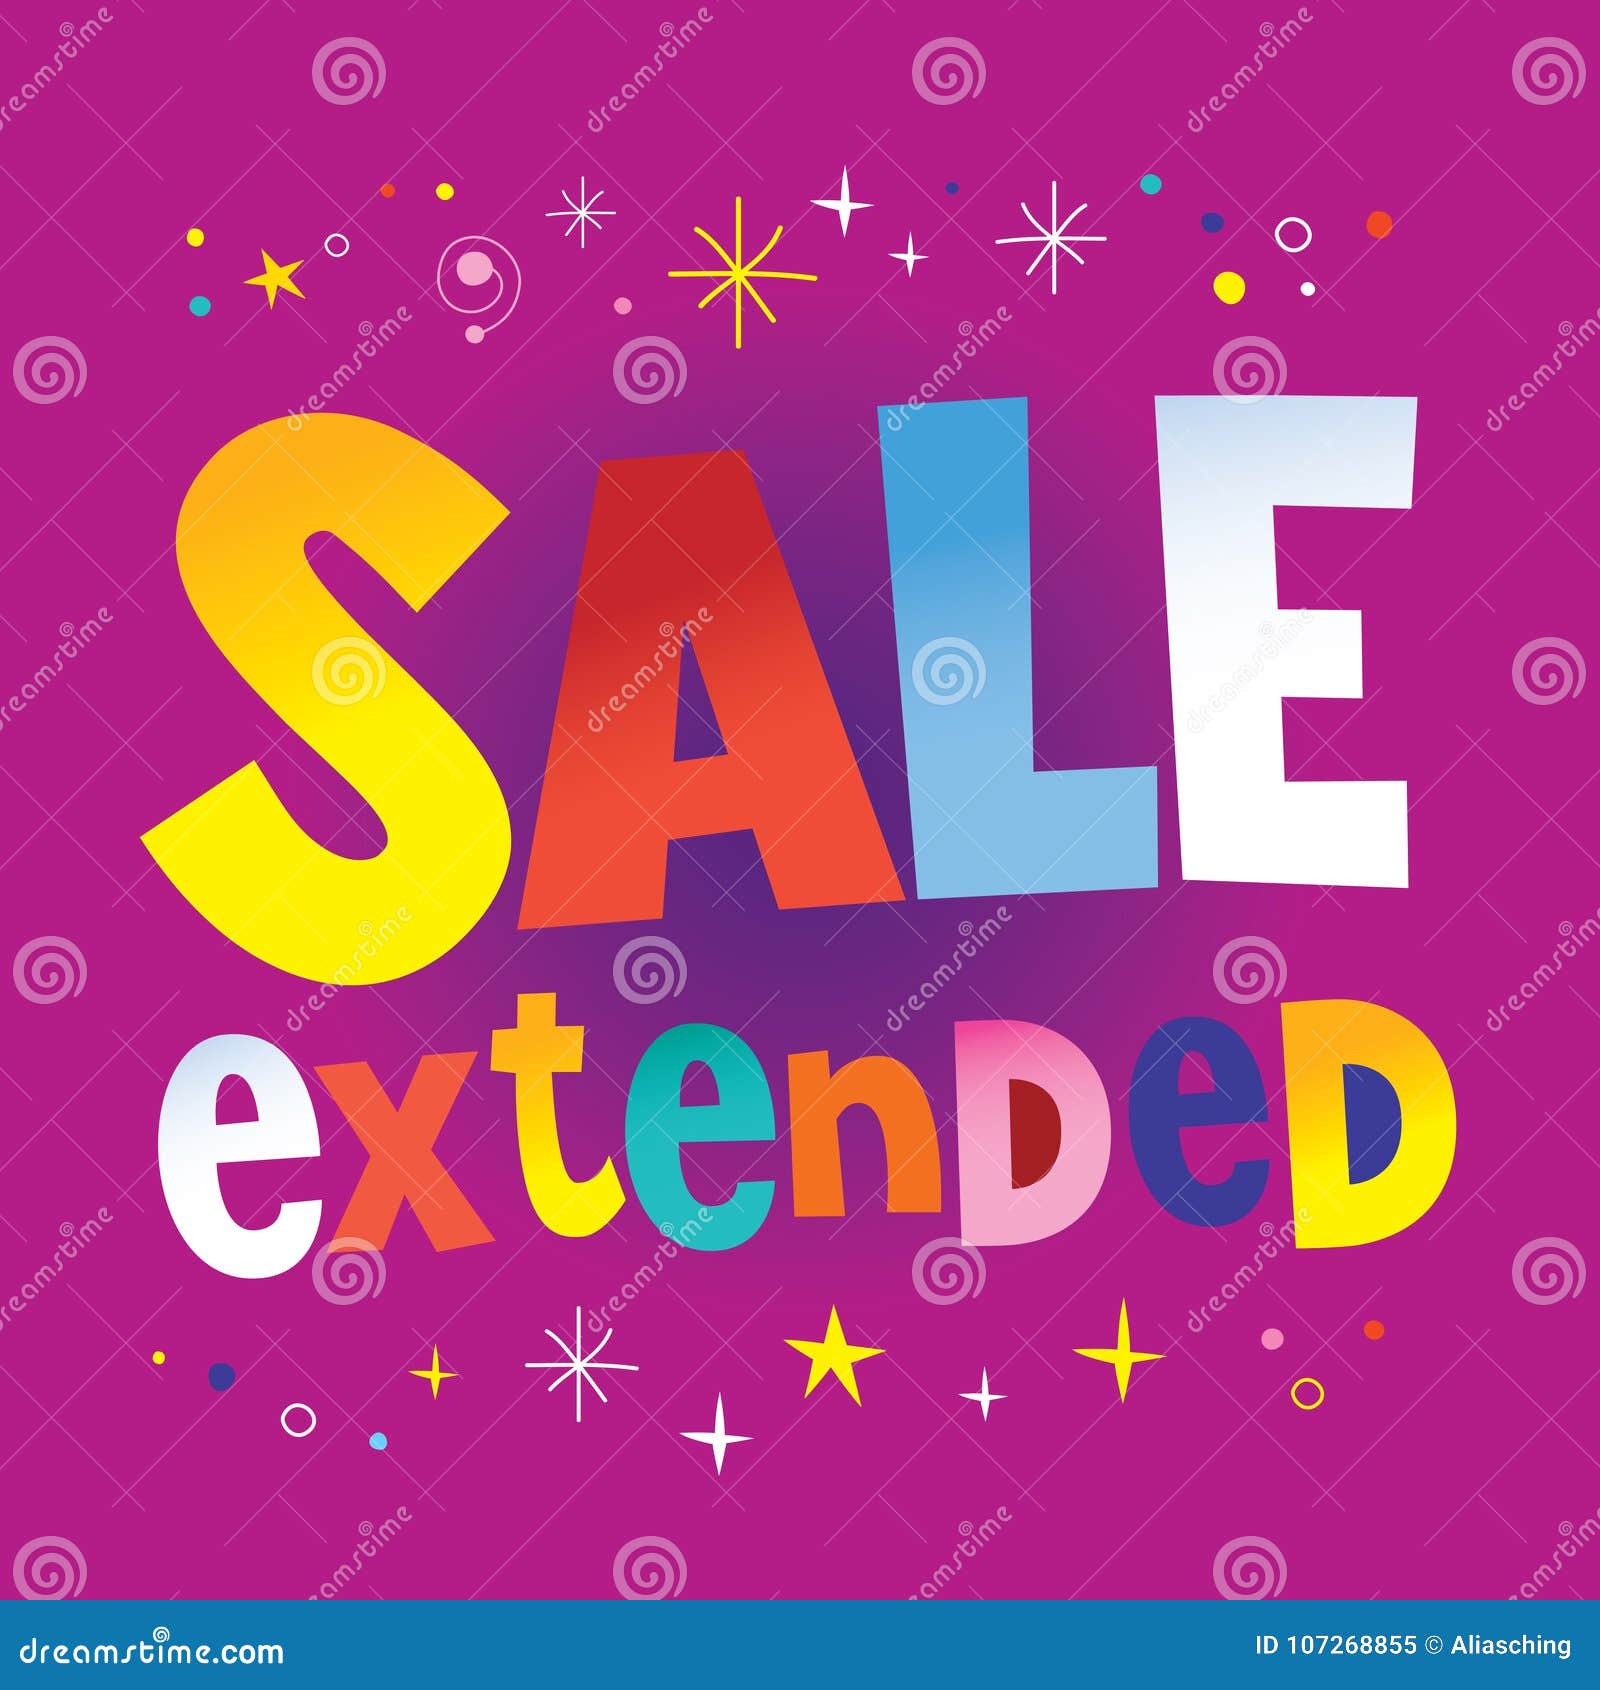 sale extended banner poster